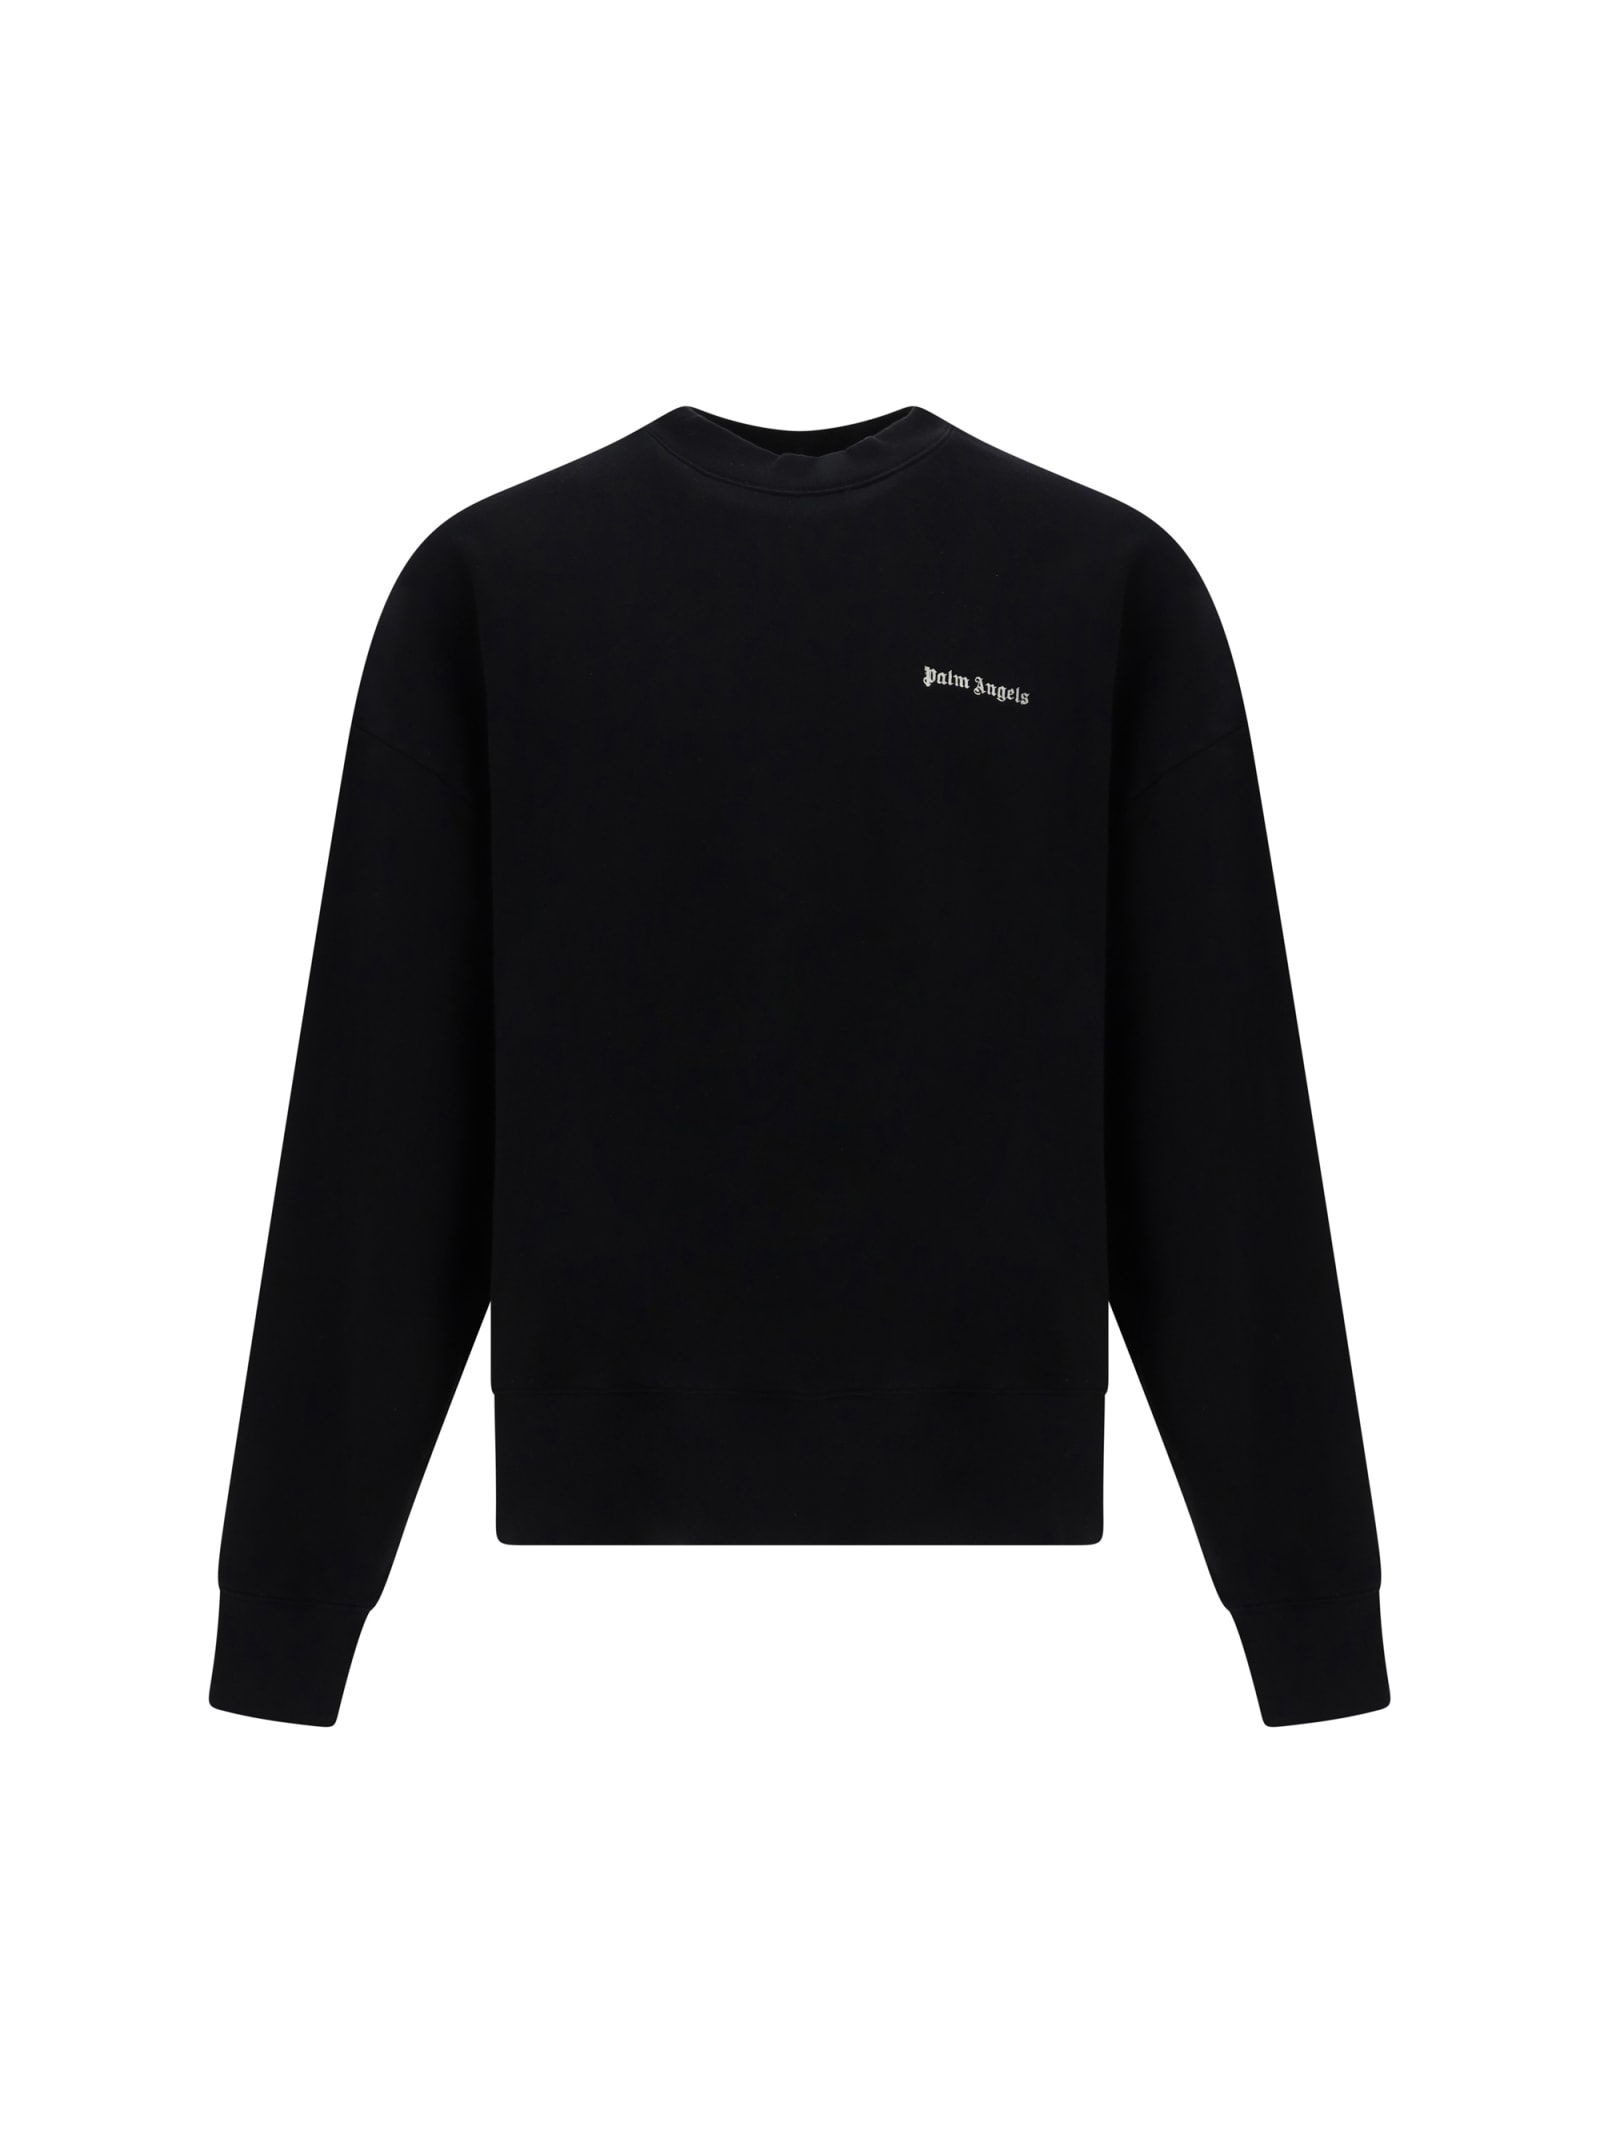 Palm Angels Black Sweatshirt With Front And Back Logo